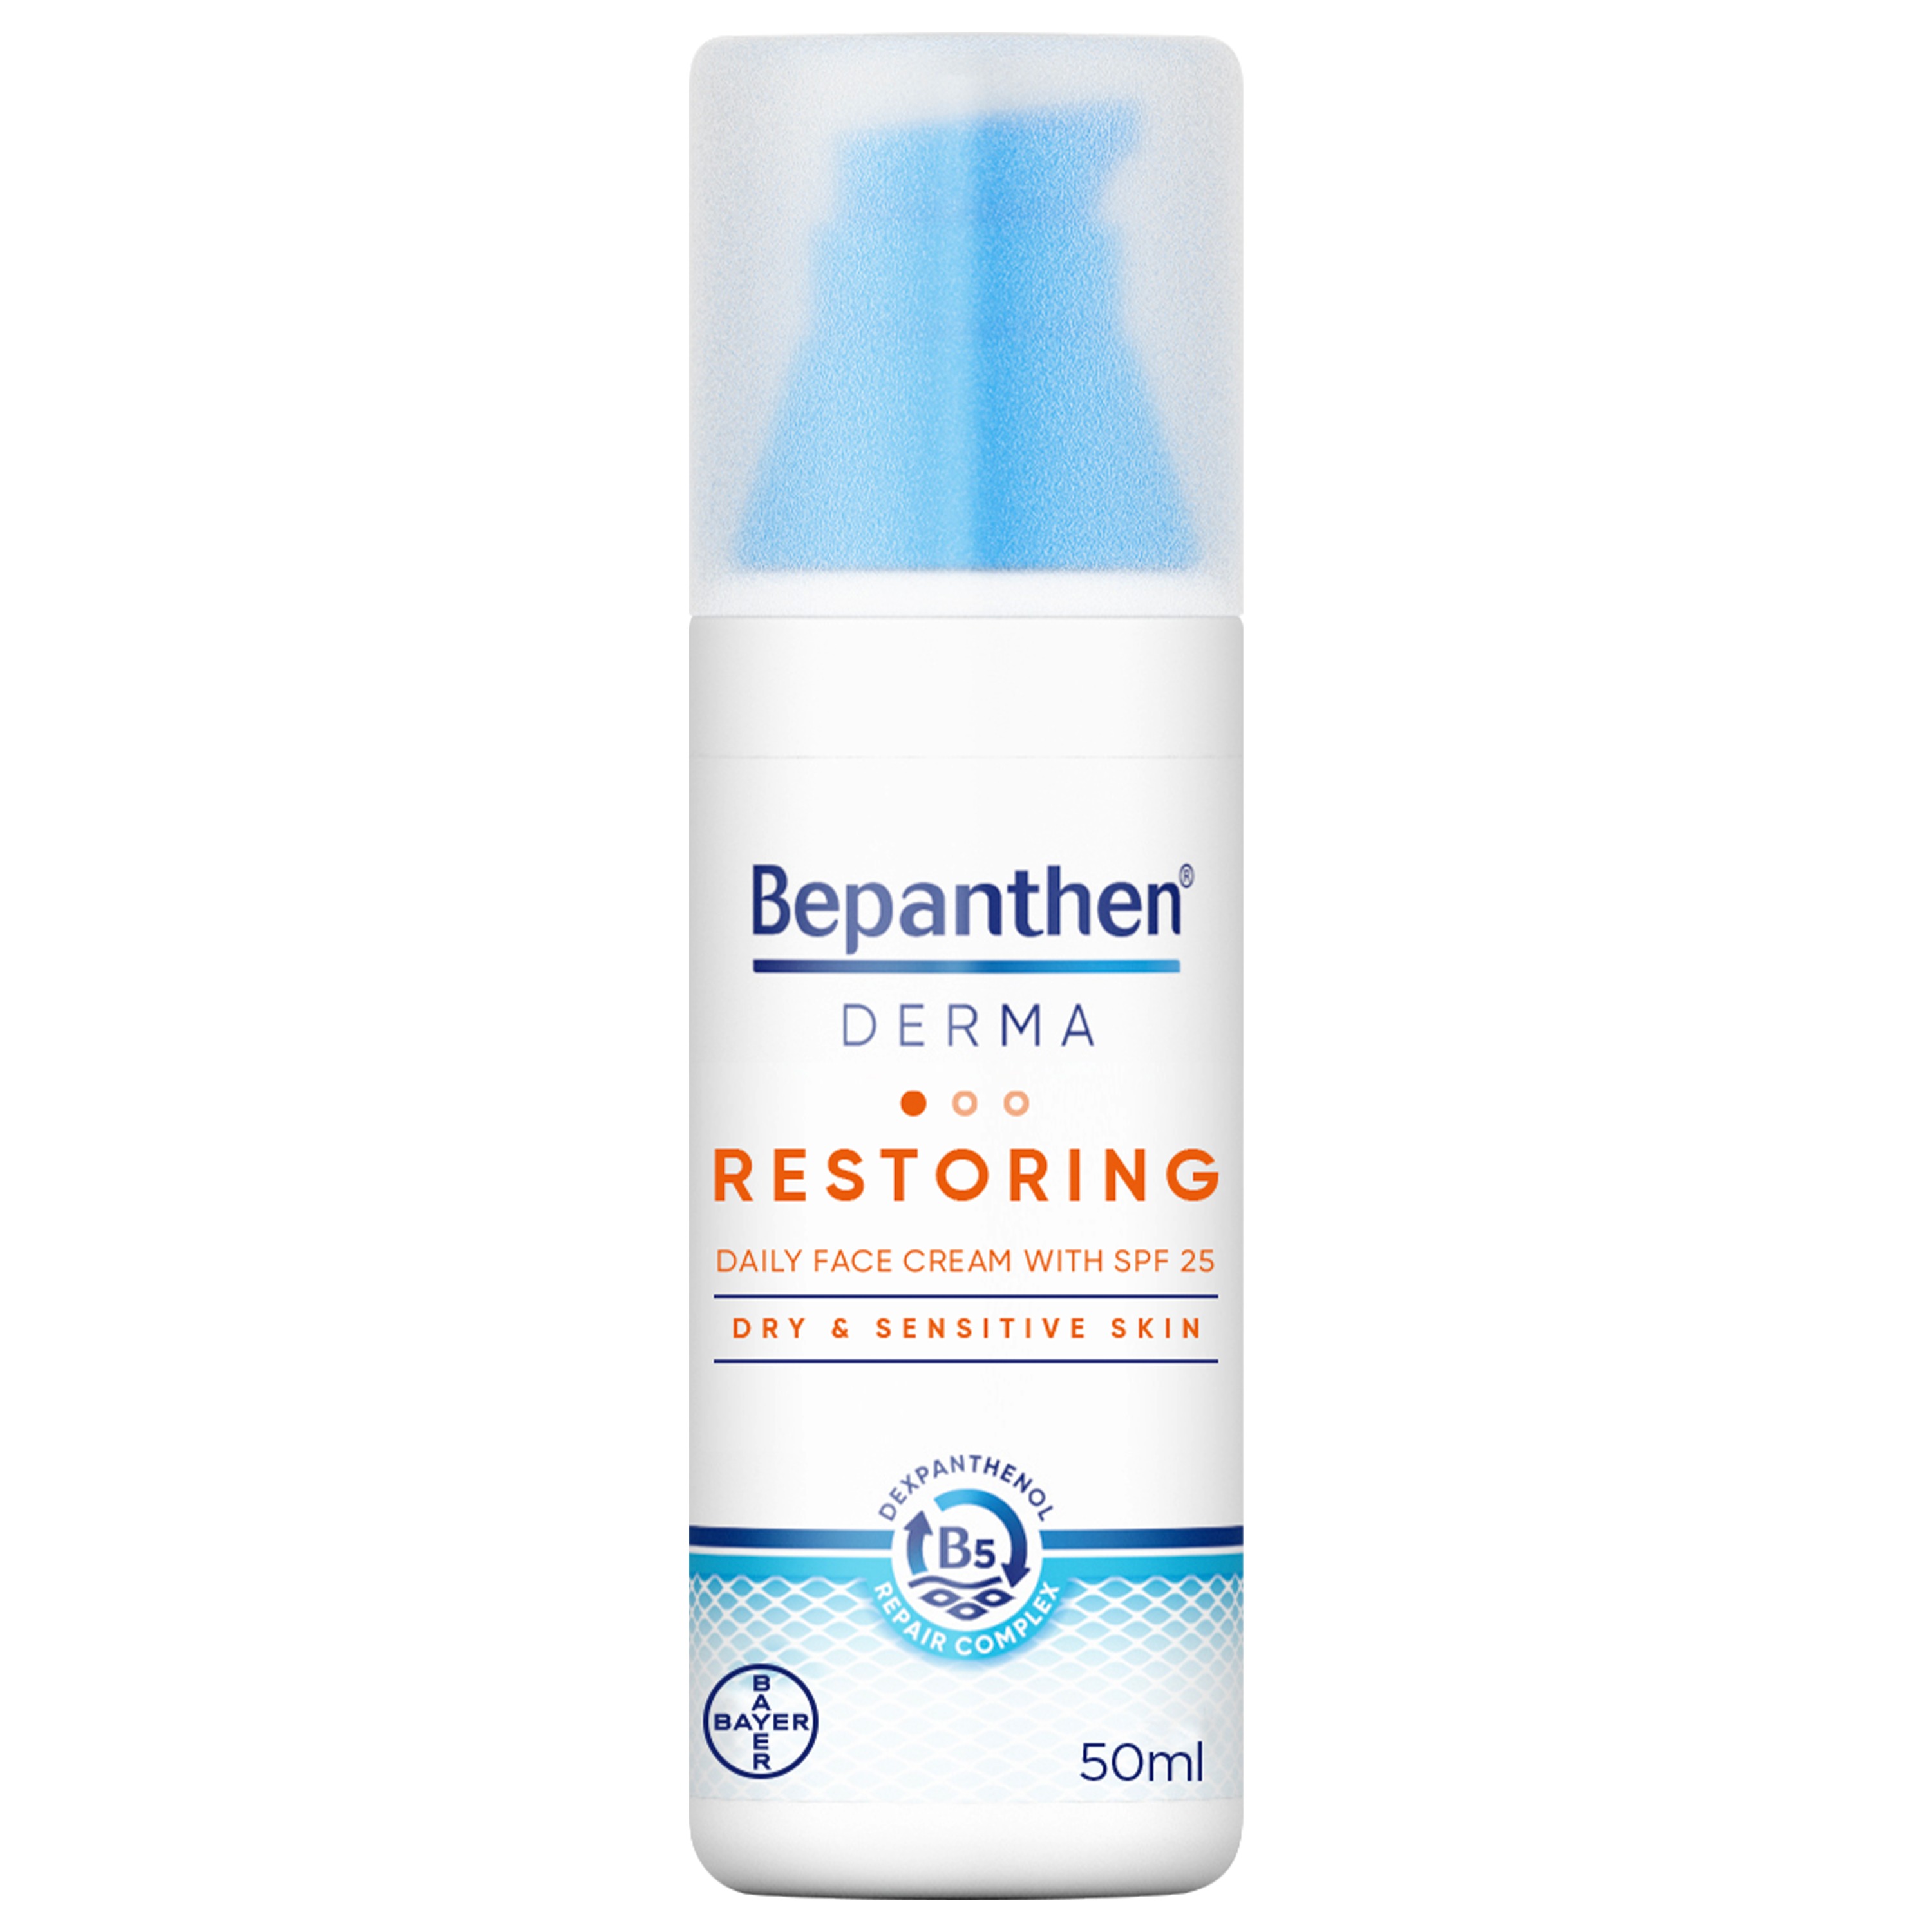 Product Image for Bepanthen® DERMA Restoring Daily Face Cream with SPF25 50ml